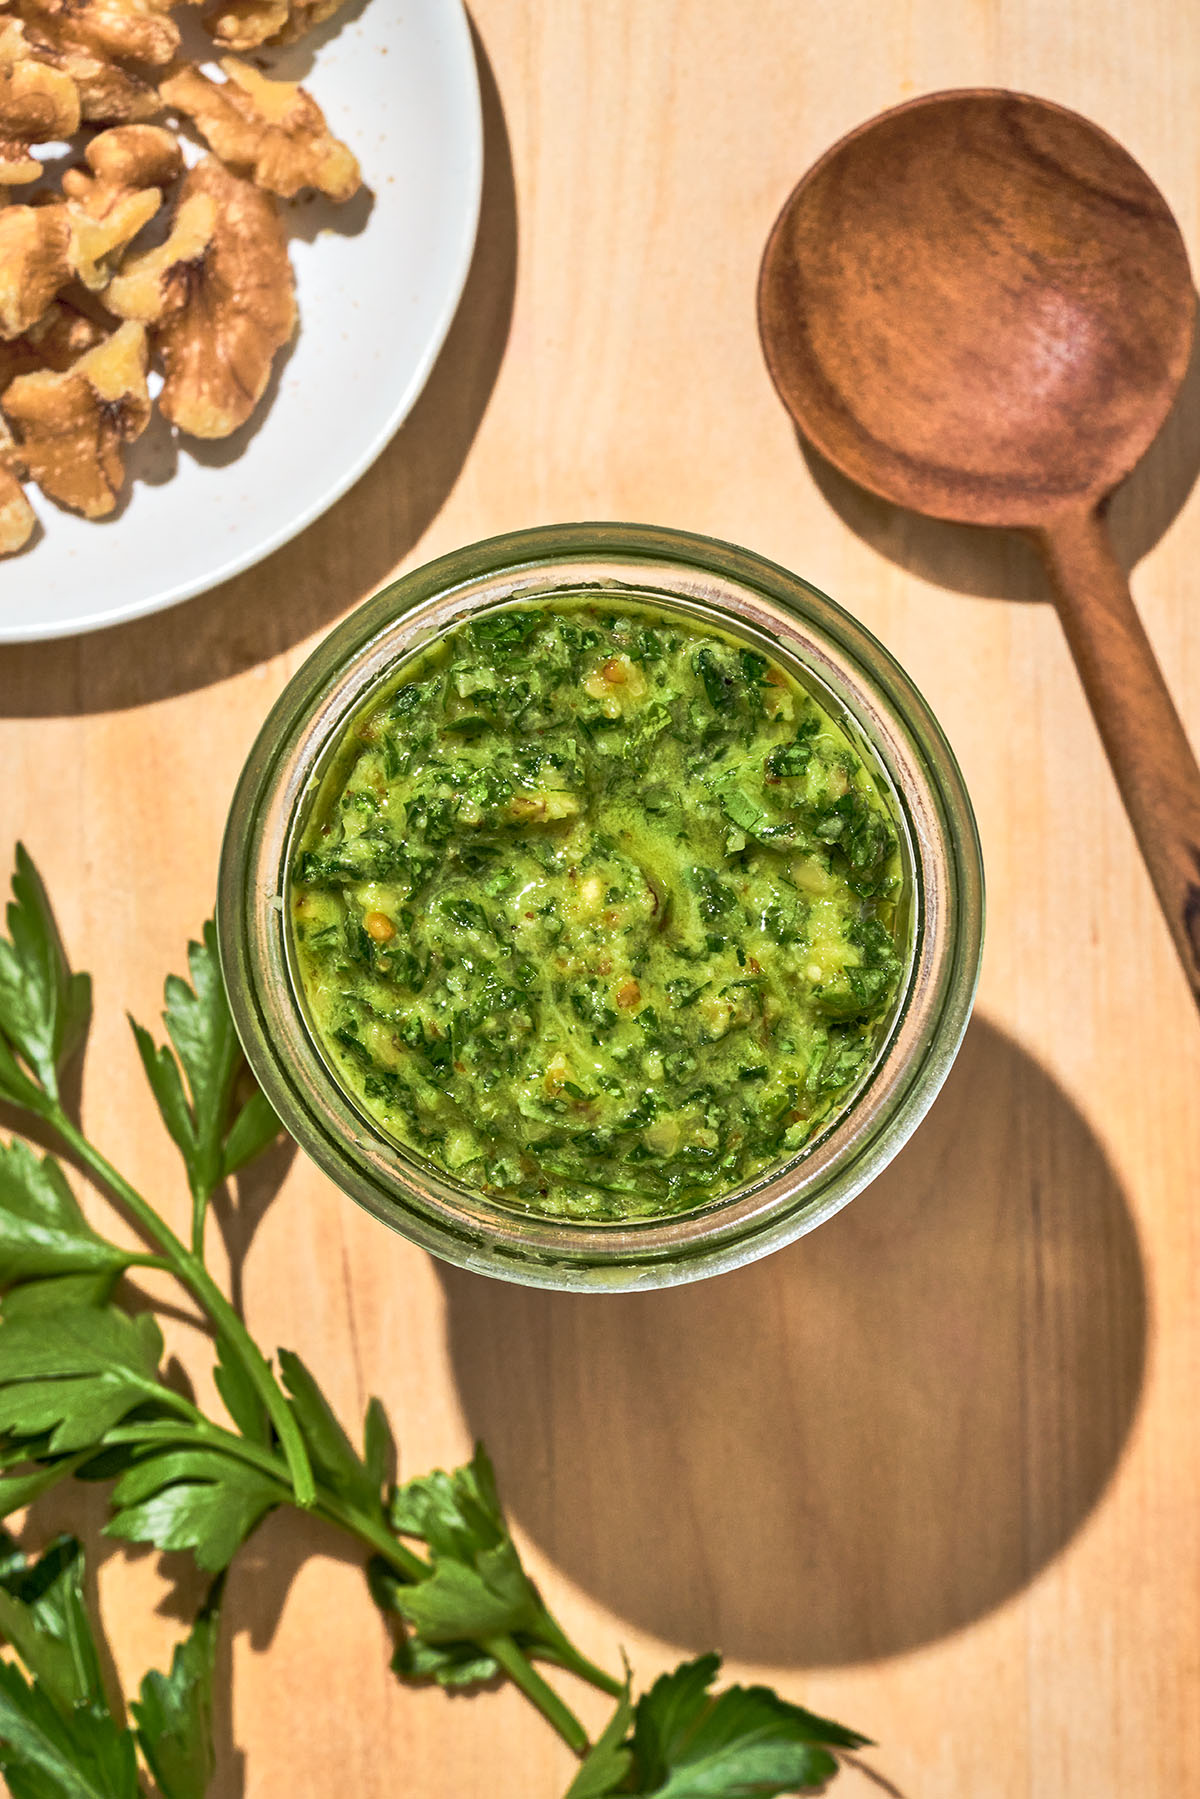 Top-down view of a jar of pesto with parsley and walnuts around.